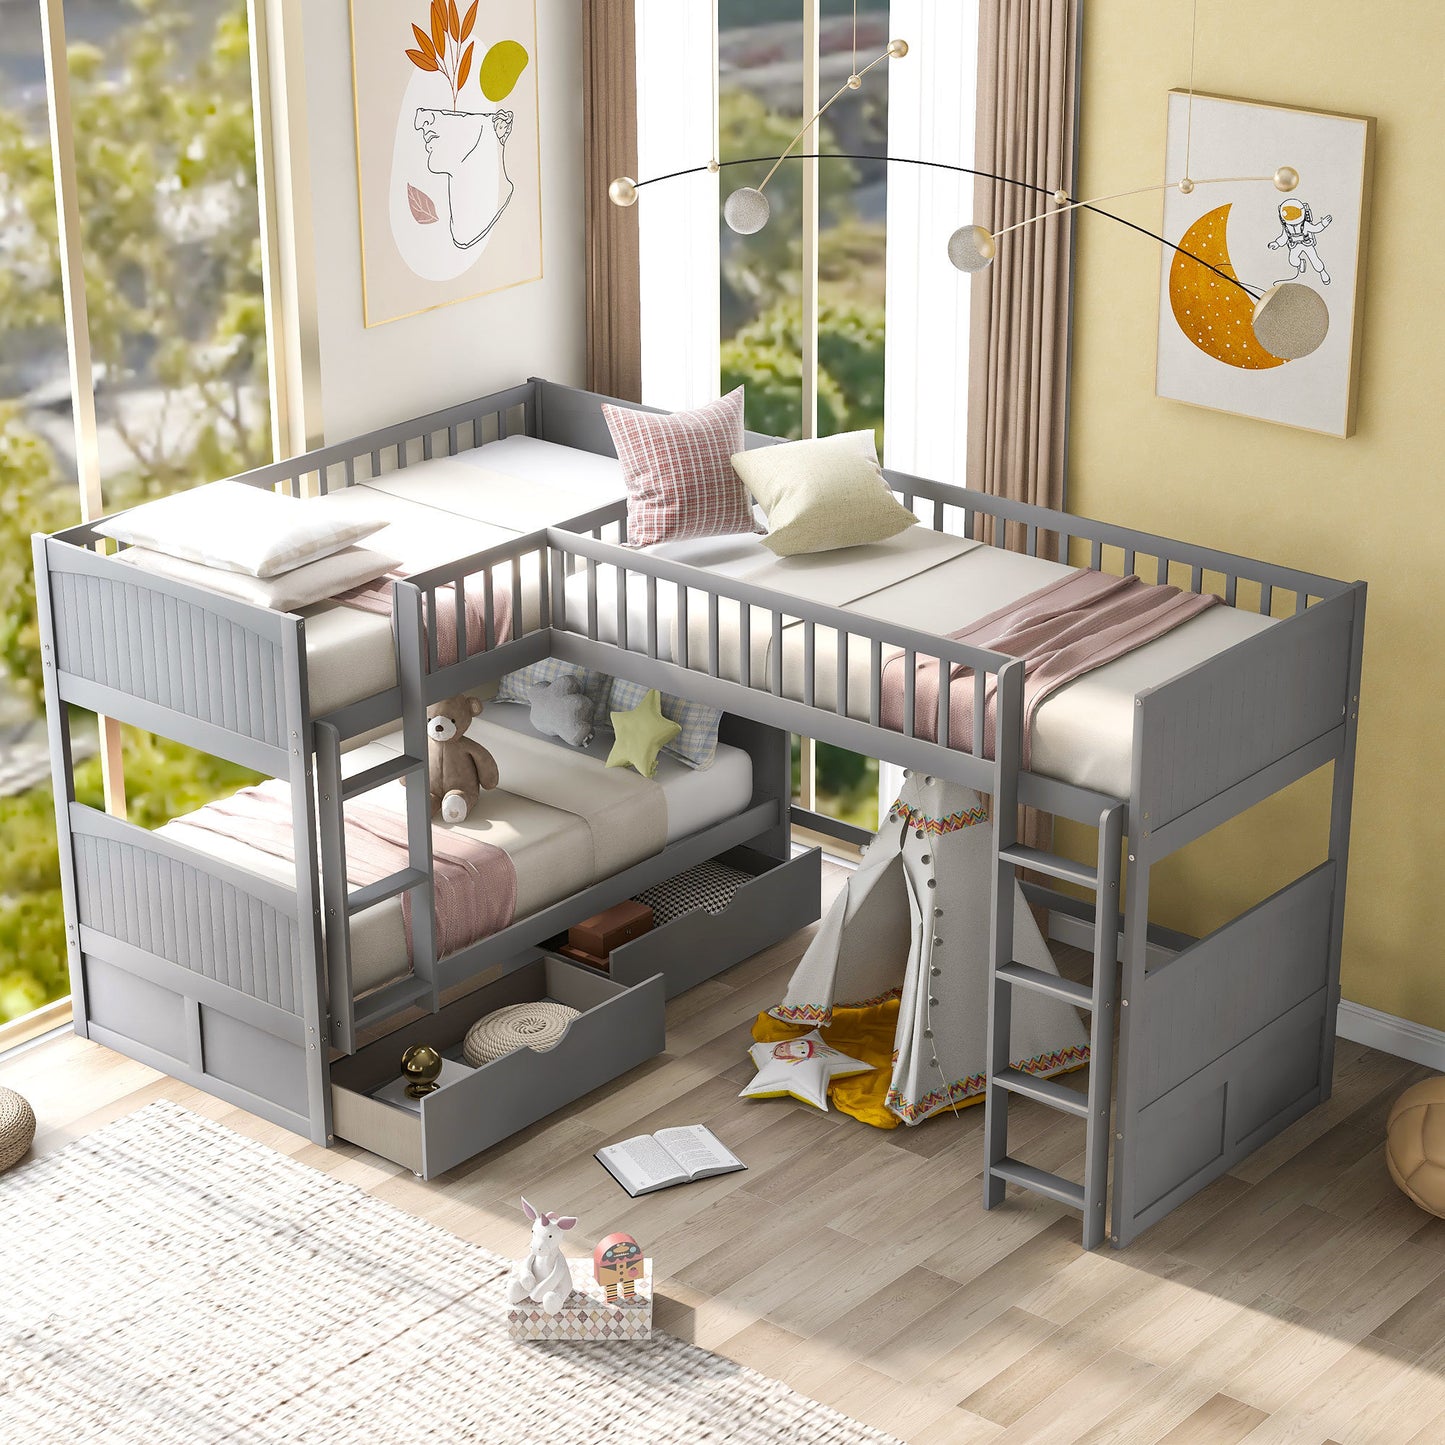 twin size bunk bed with a loft bed attached and two drawers, gray